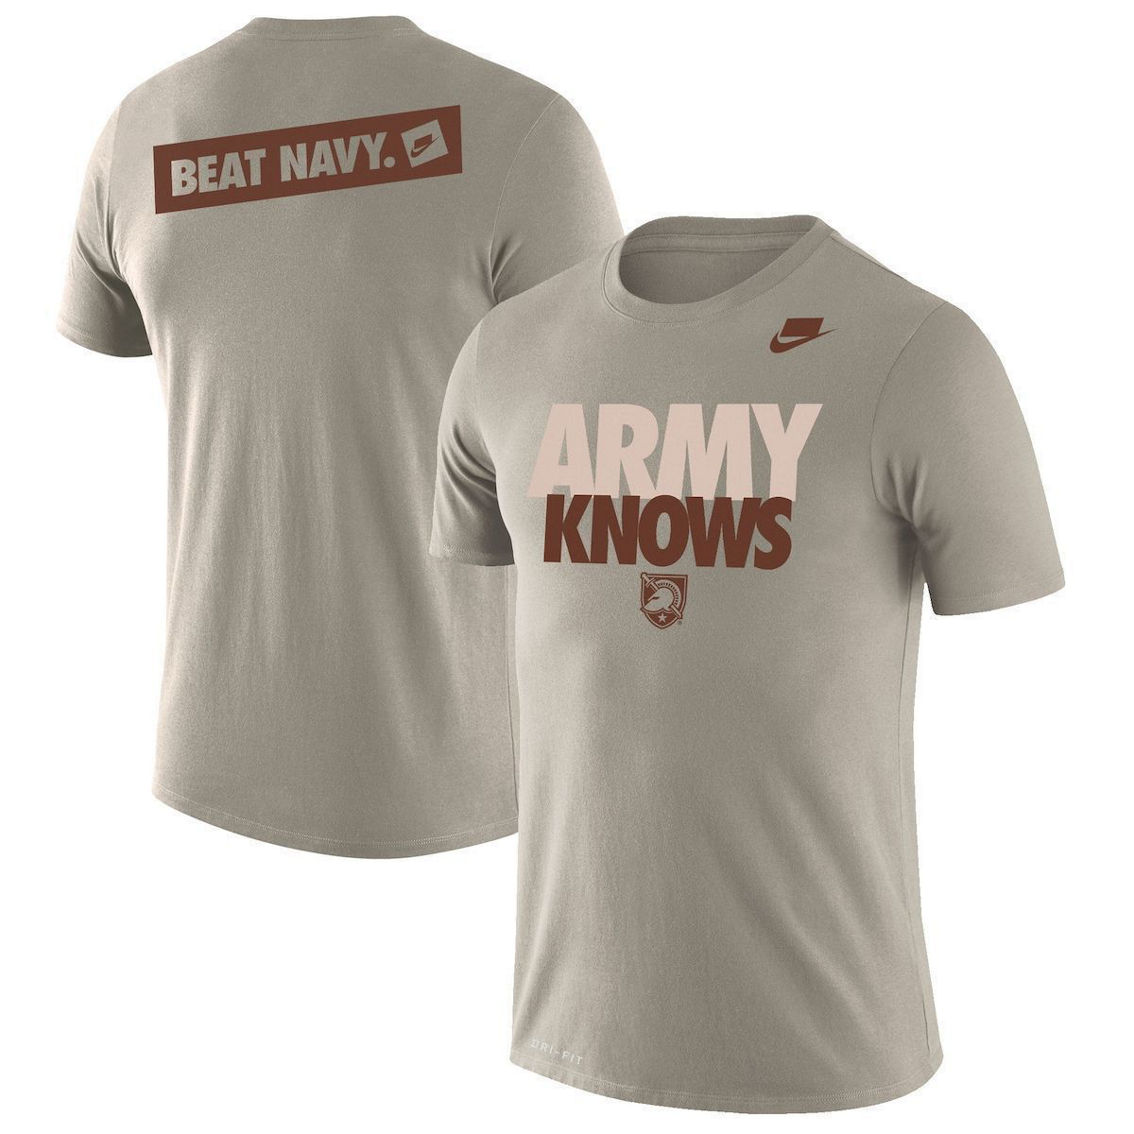 Nike Men's Natural Army Black Knights Rivalry Army Knows 2-Hit Legend T-Shirt - Image 2 of 4